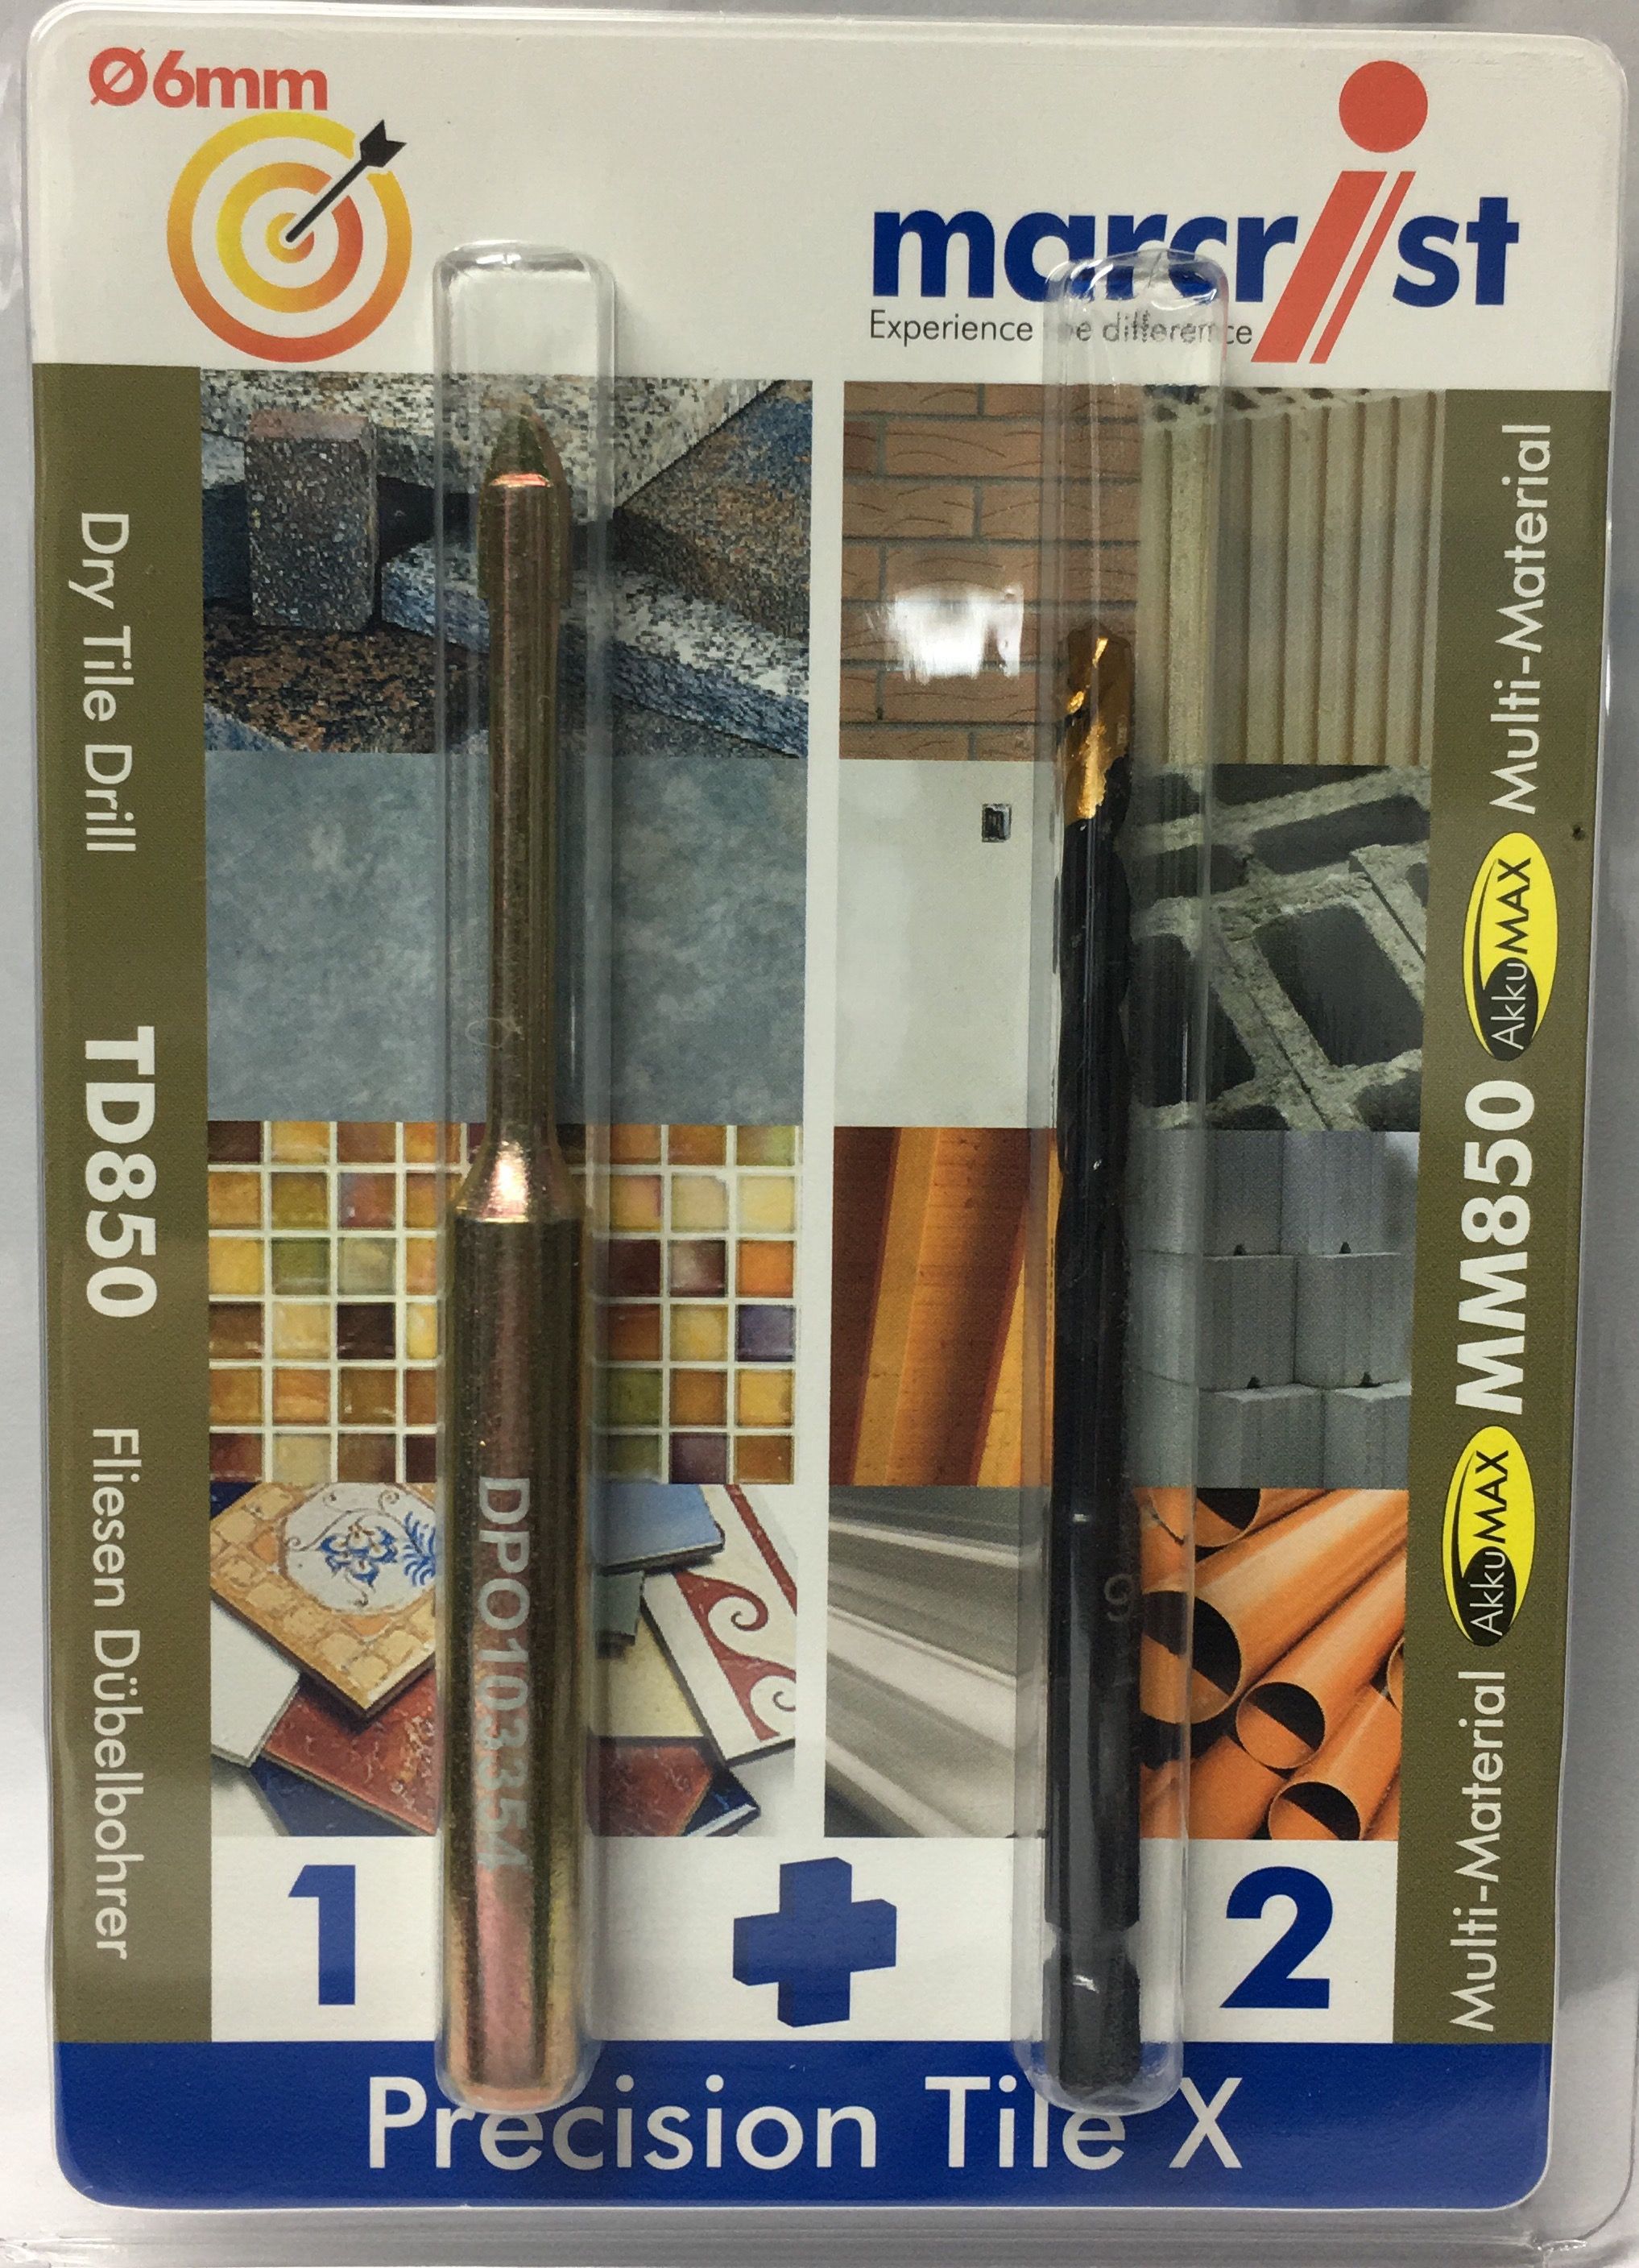 Marcrist Precision Tile X 6mm Twin pack